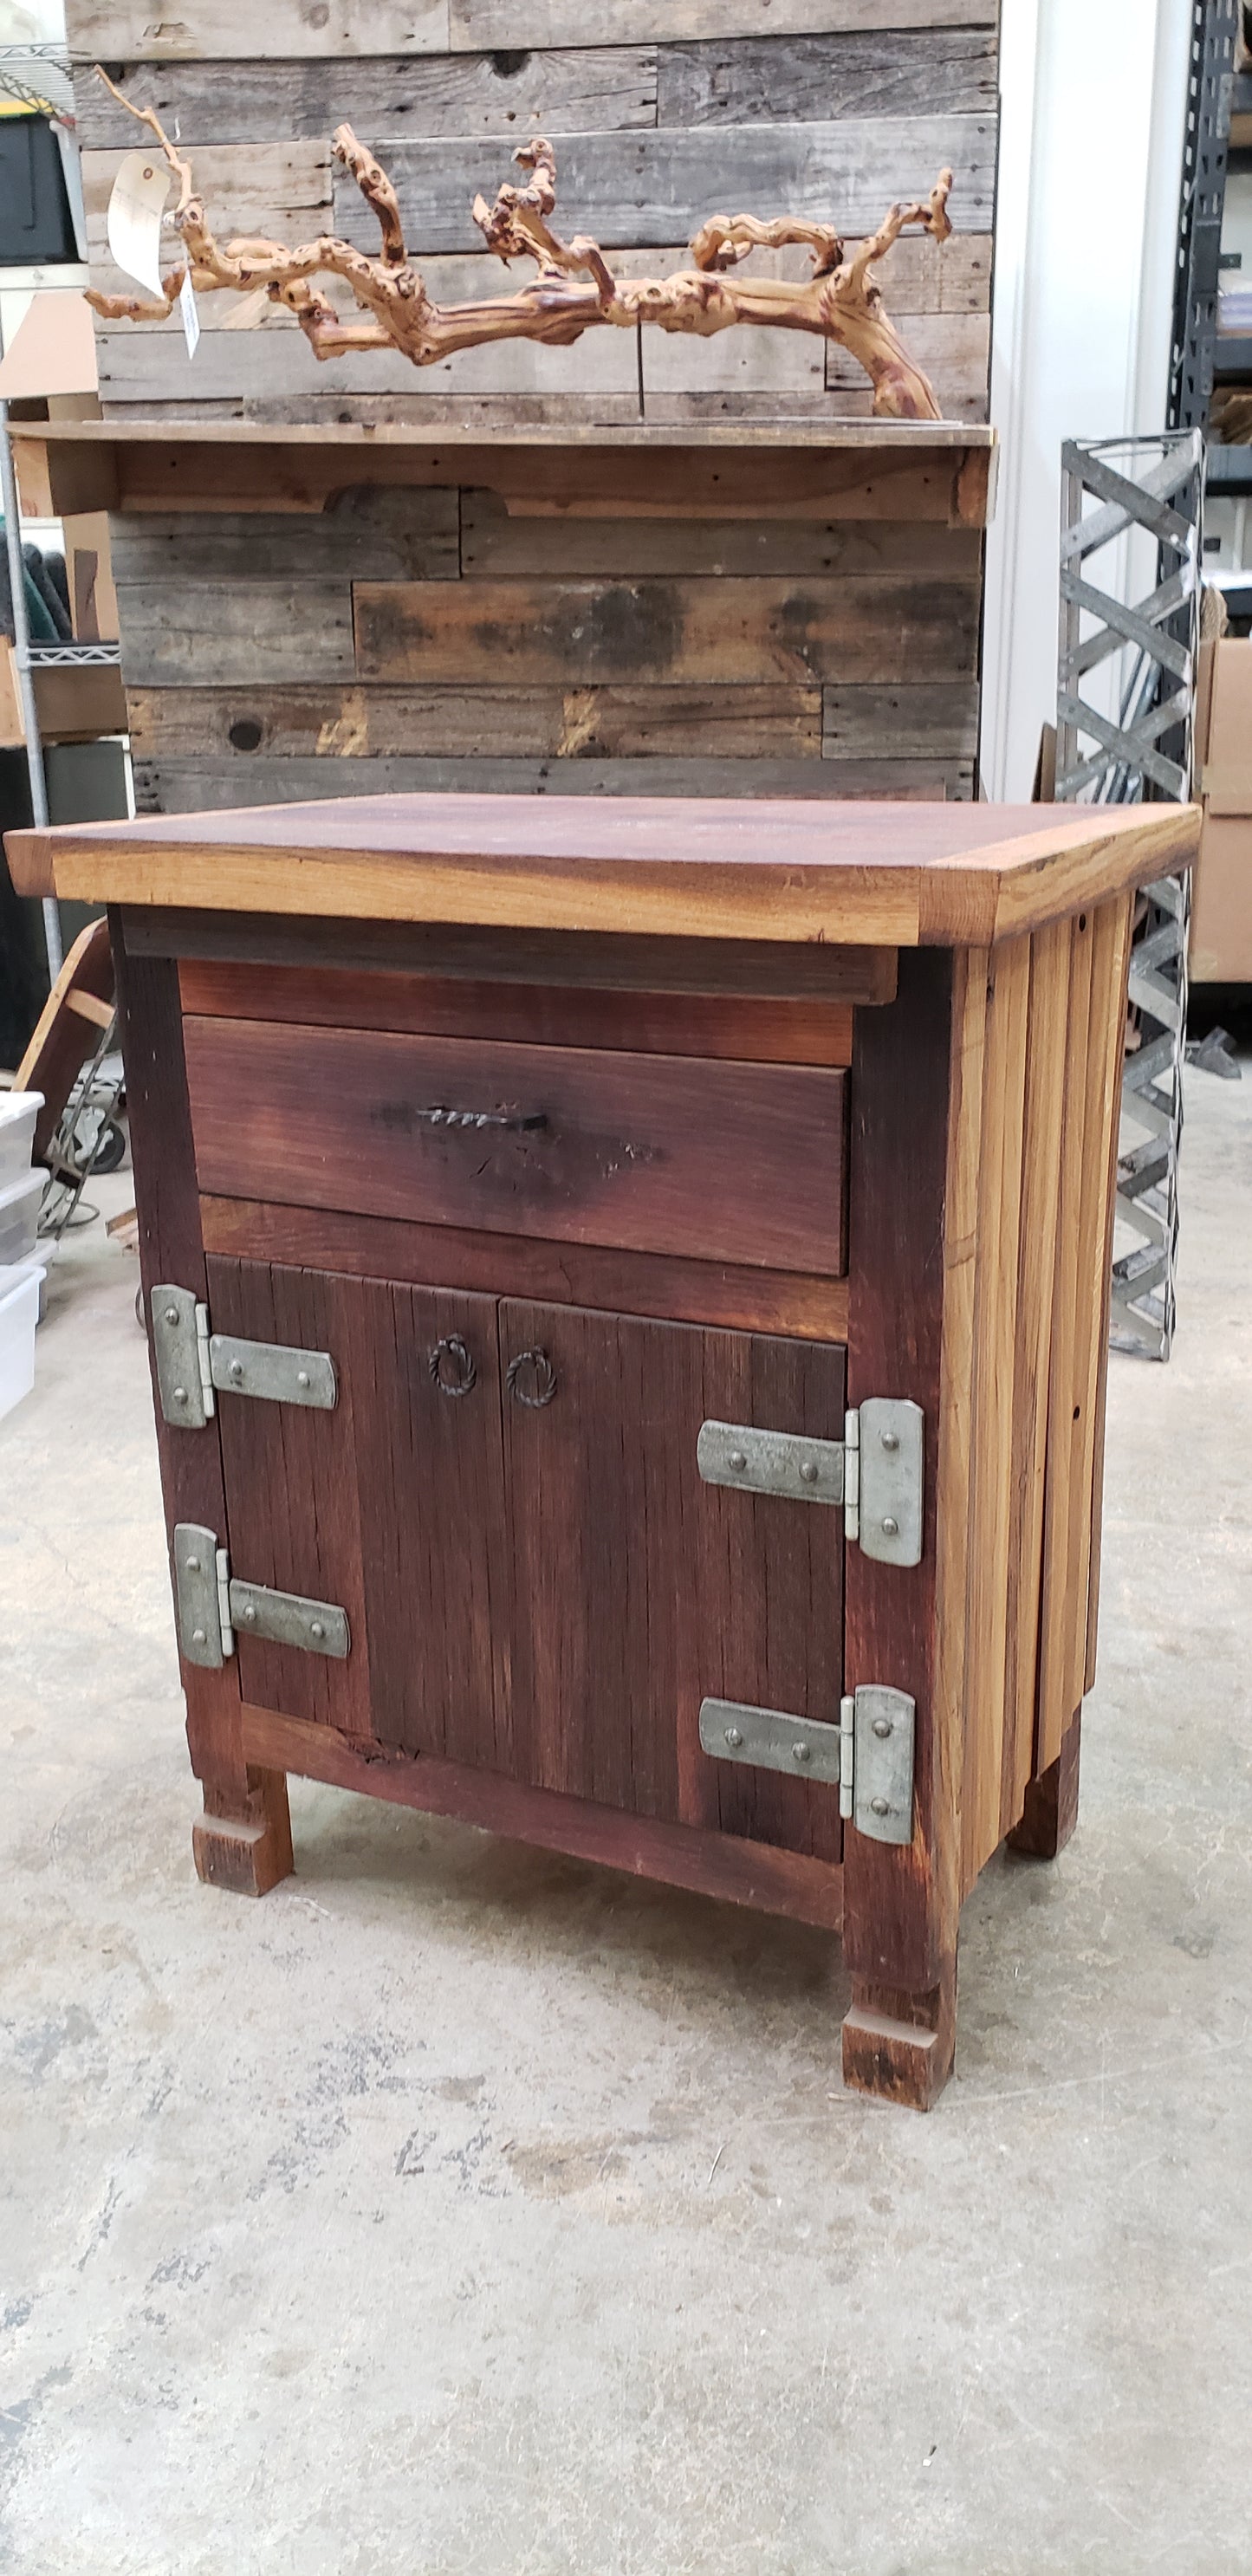 Wine Tank Wood - Remas - Cabinet or Side Table Made from retired California wine barrels